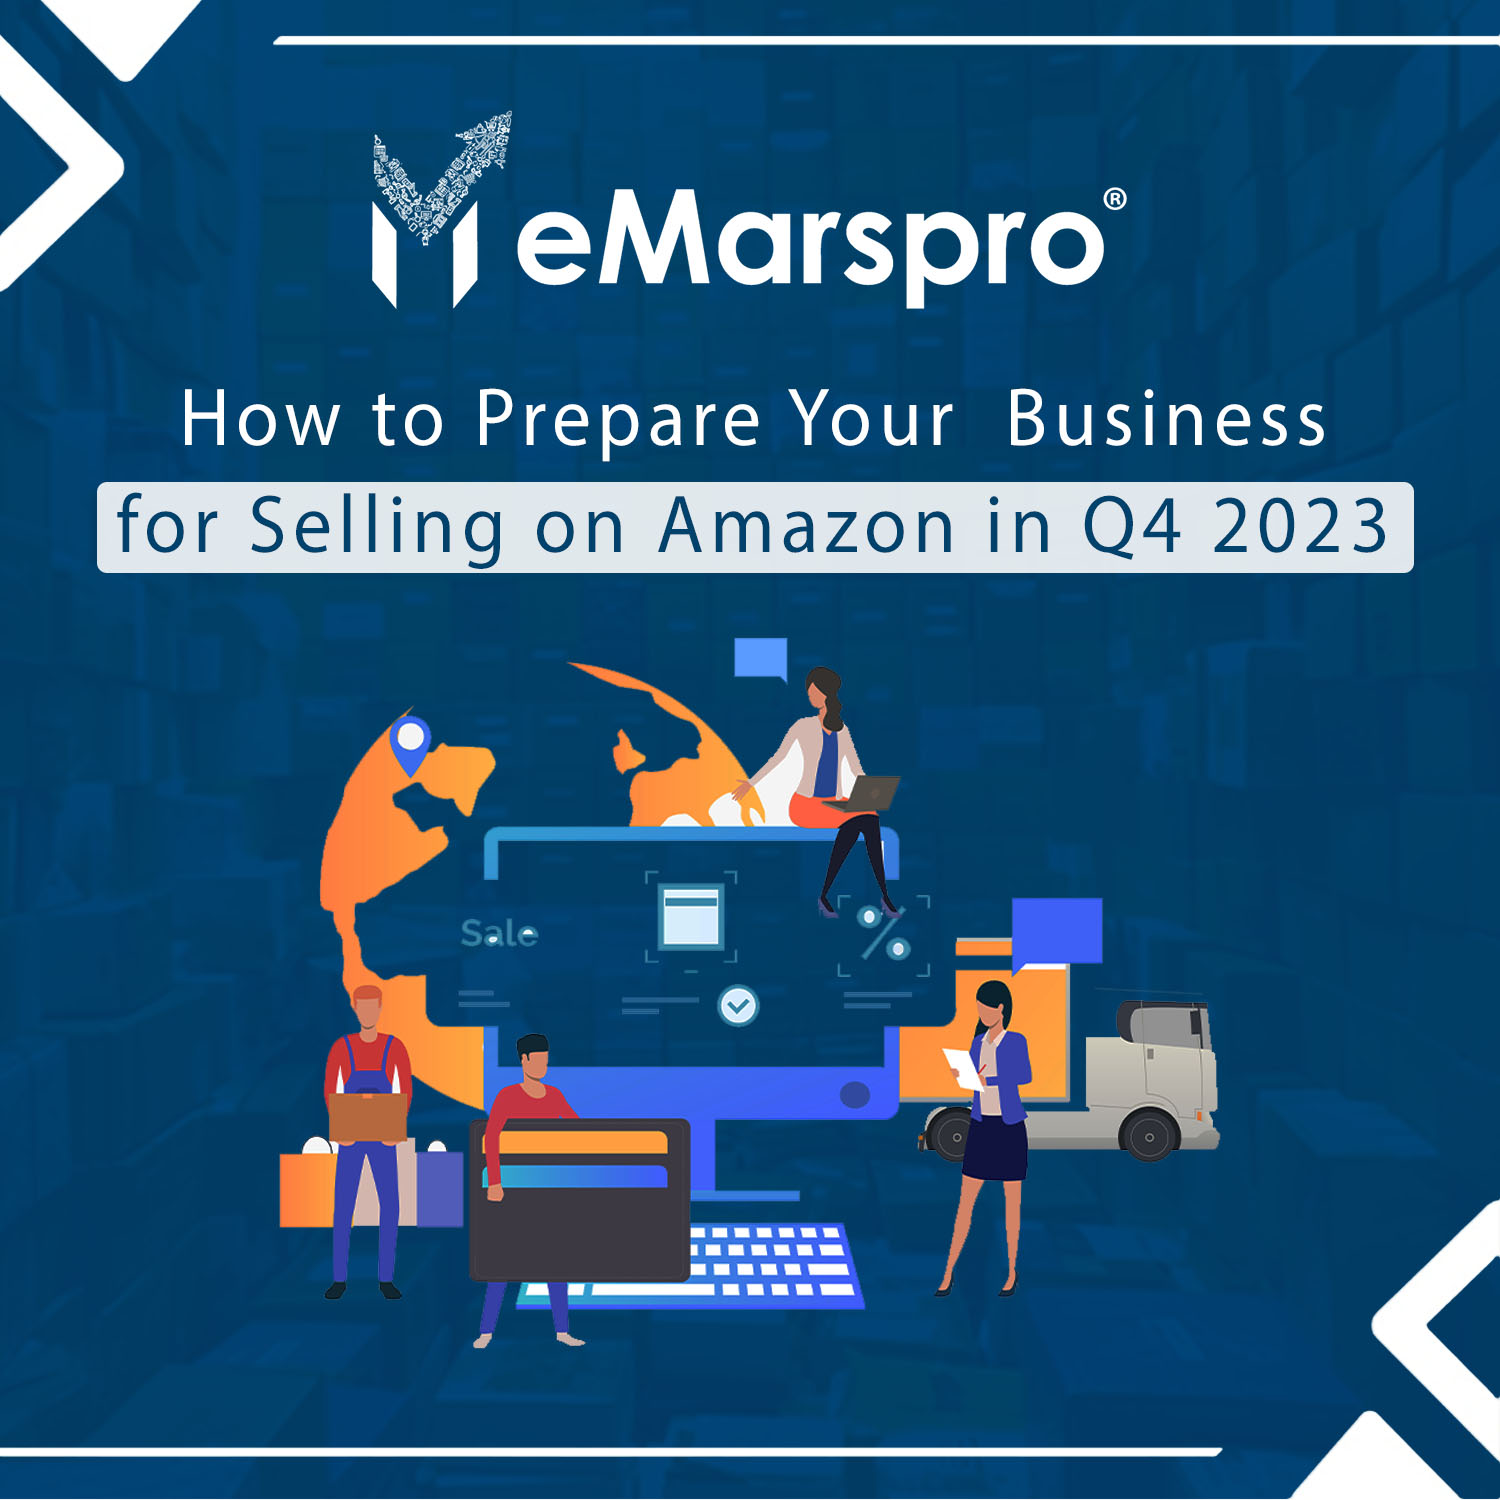 Prepare Your Business for Selling on Amazon in Q4 2023